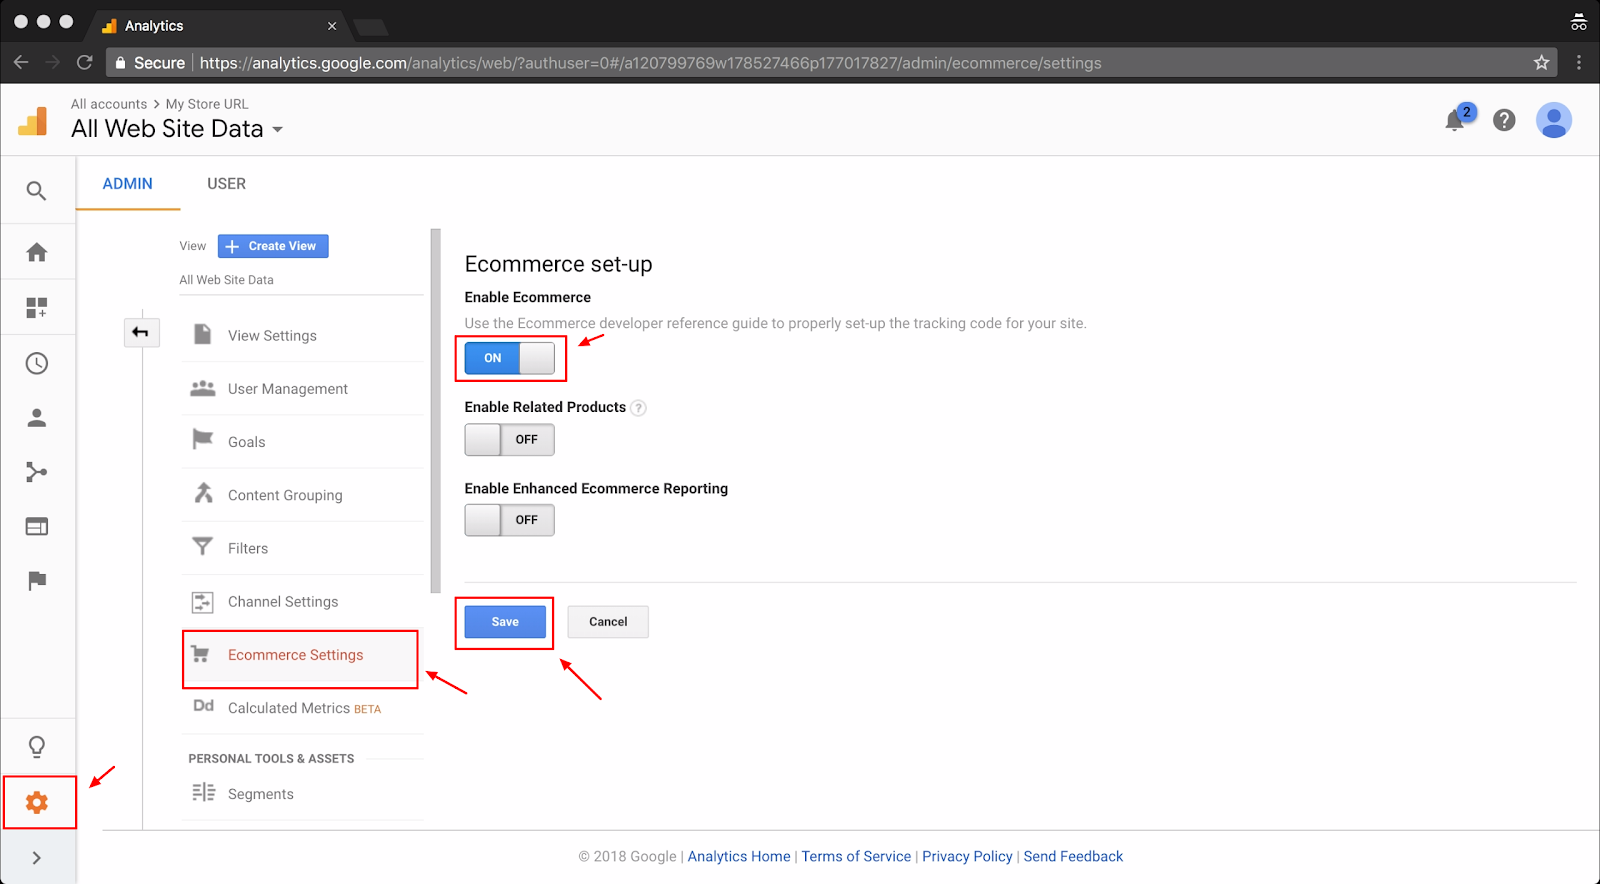 Screenshot showing a settings page on the Google Analytics dashboard